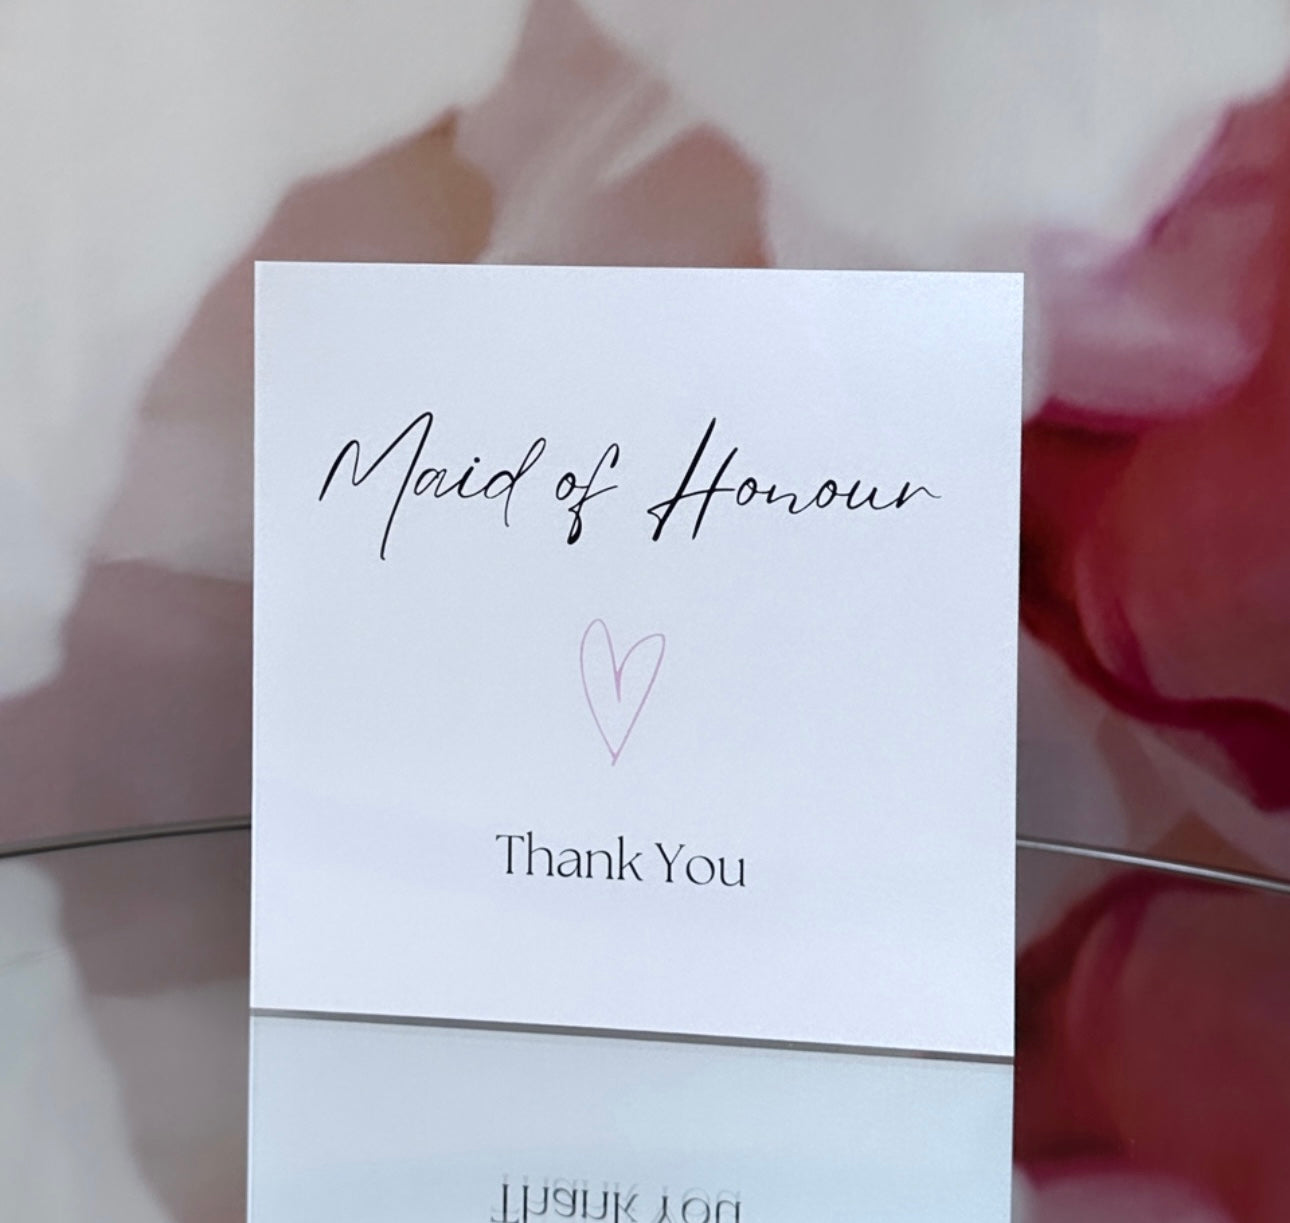 Thank You Maid of Honour Card (Heart Design)